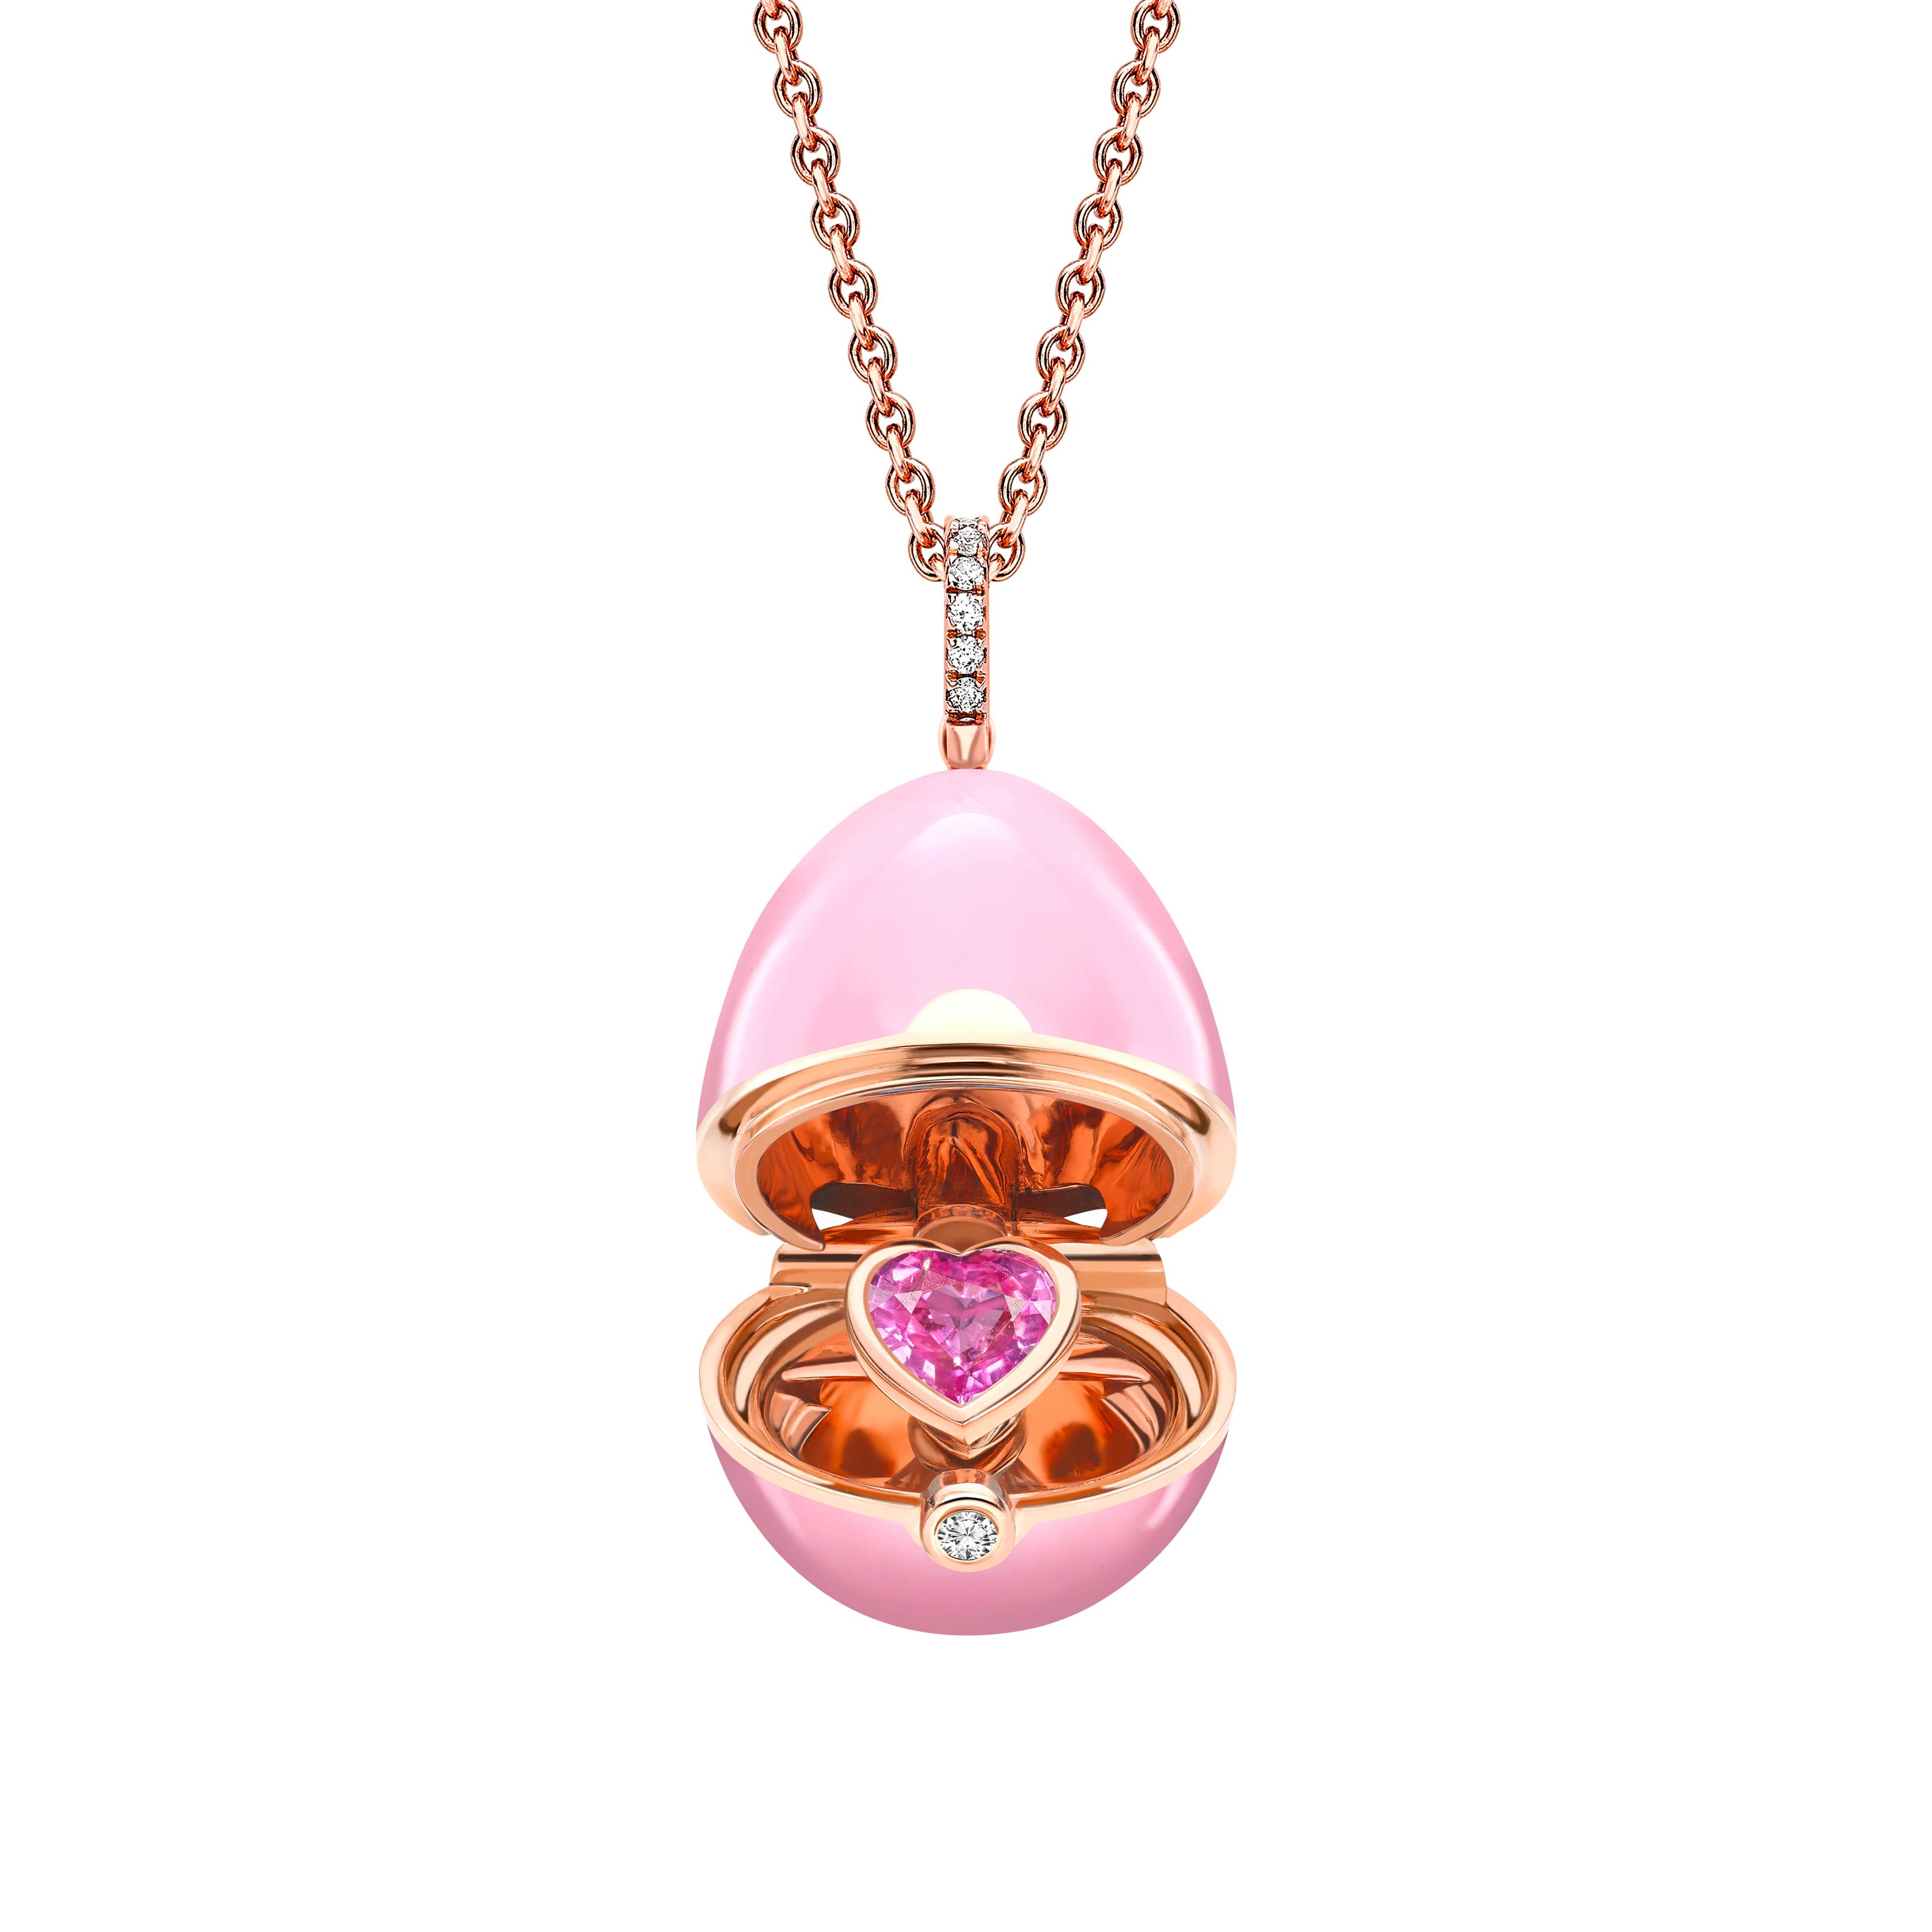 Fabergé Essence Rose Gold, Diamond & Pink Sapphire Heart Surprise Locket with Pink Lacquer